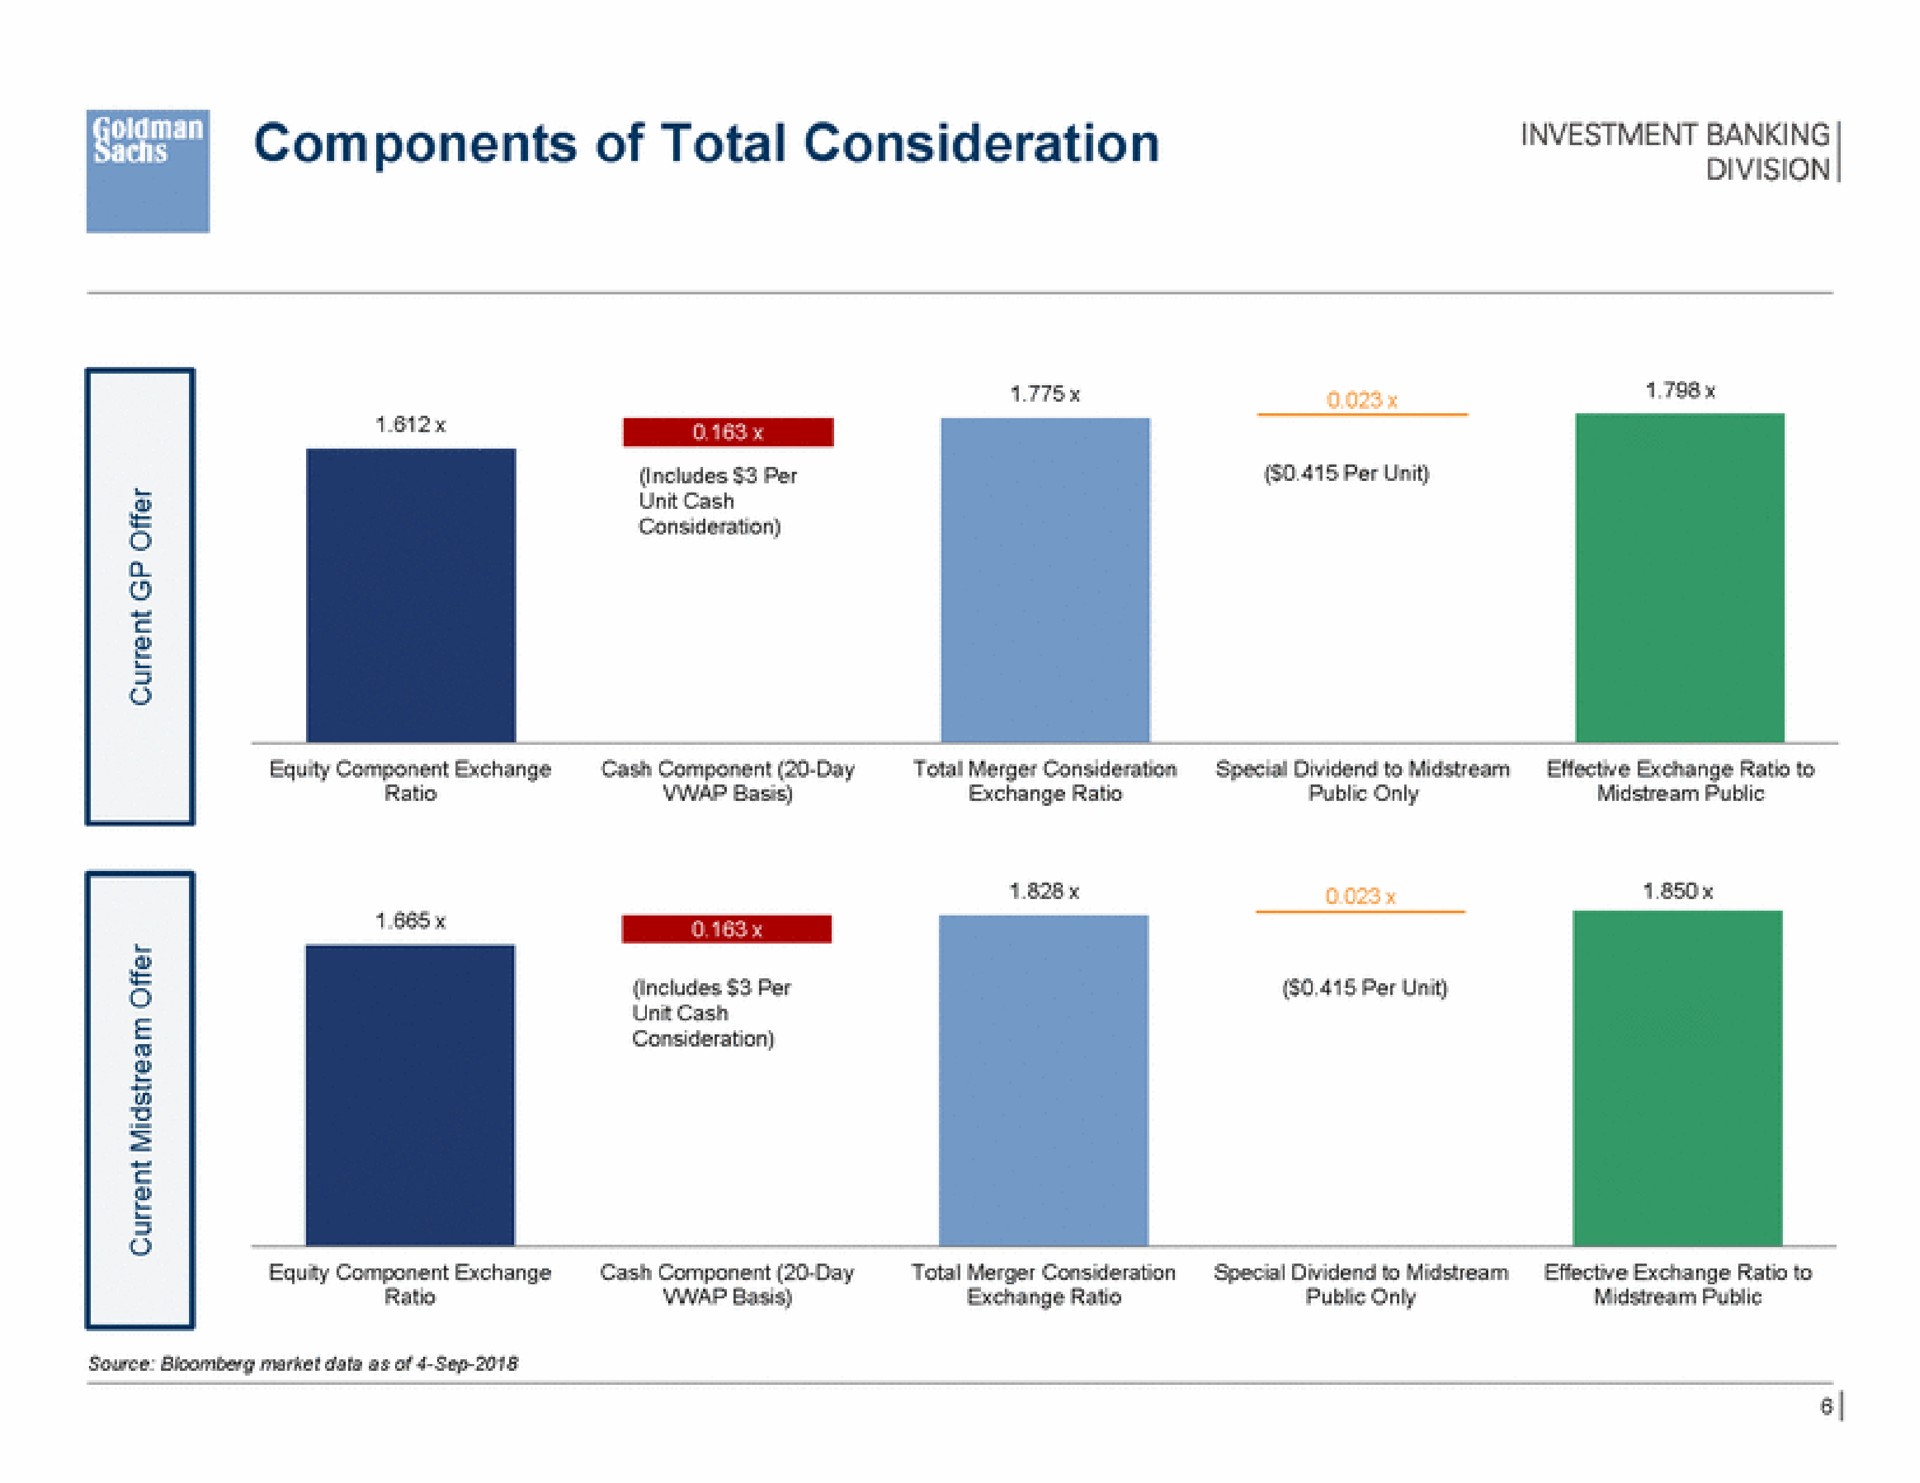 components of total consideration me | Goldman Sachs